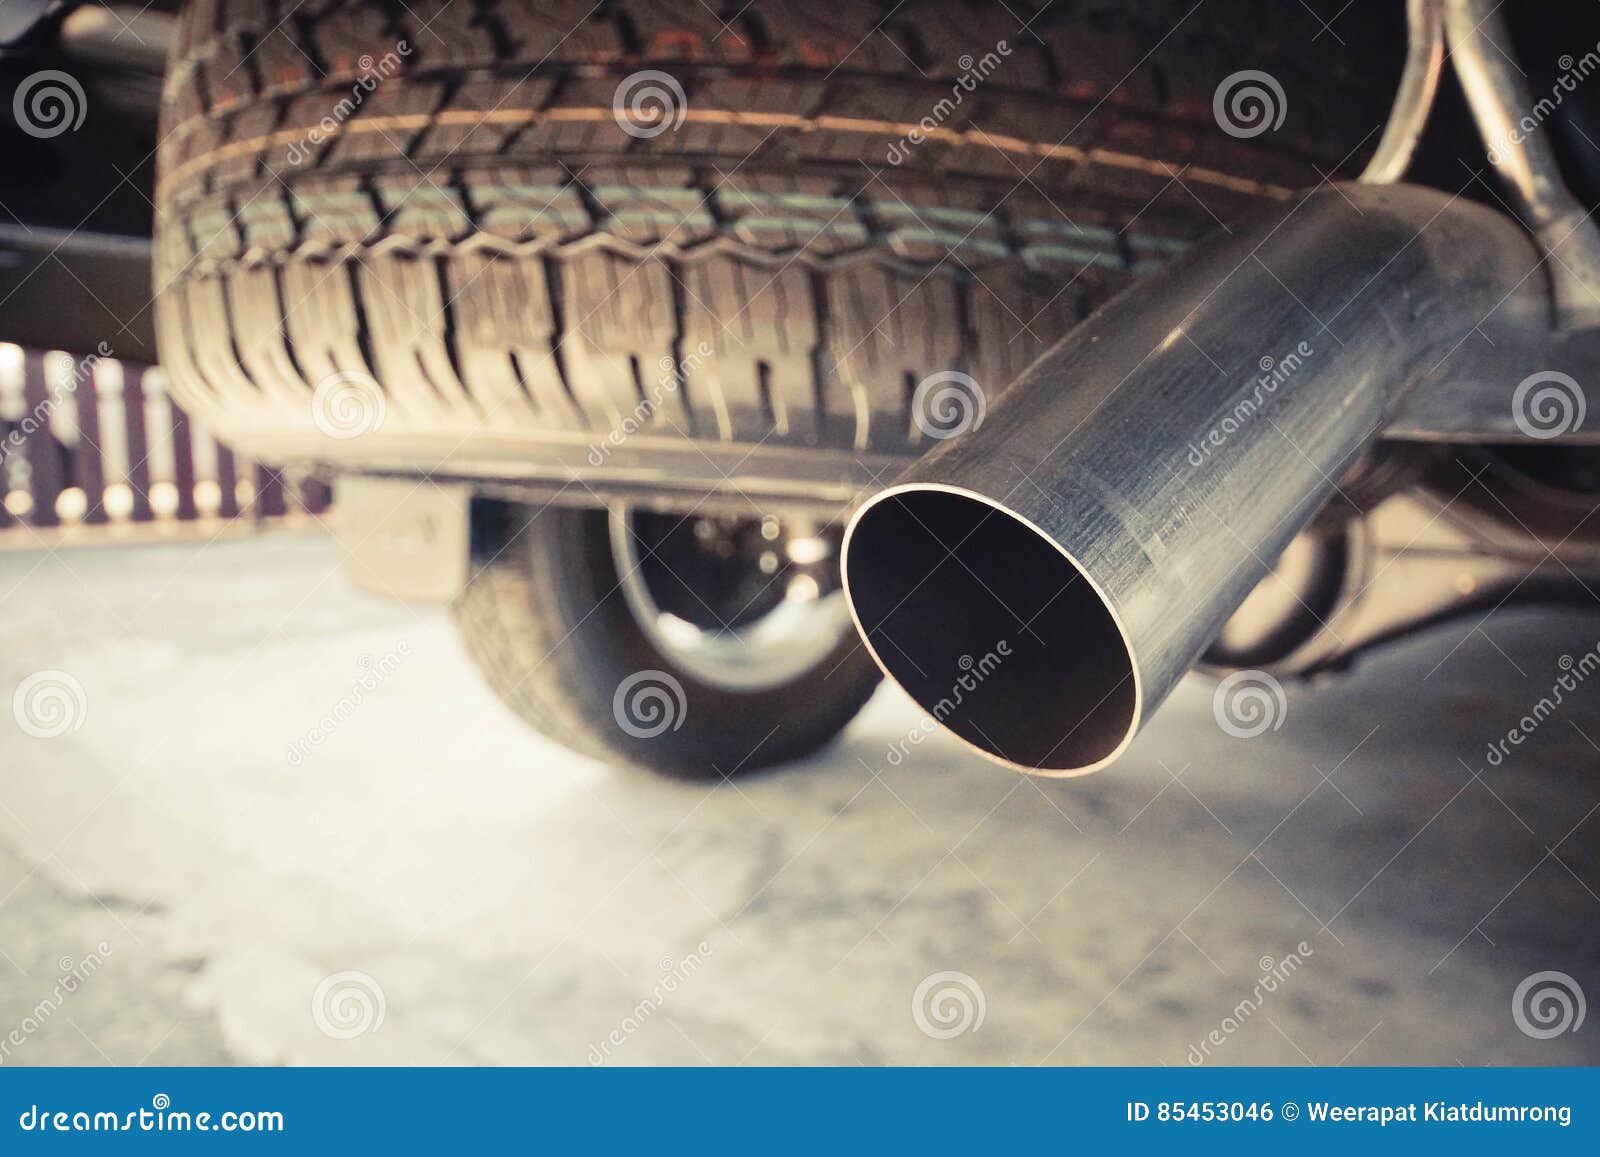 Exhaust pipe of a truck stock photo. Image of exhaust - 85453046